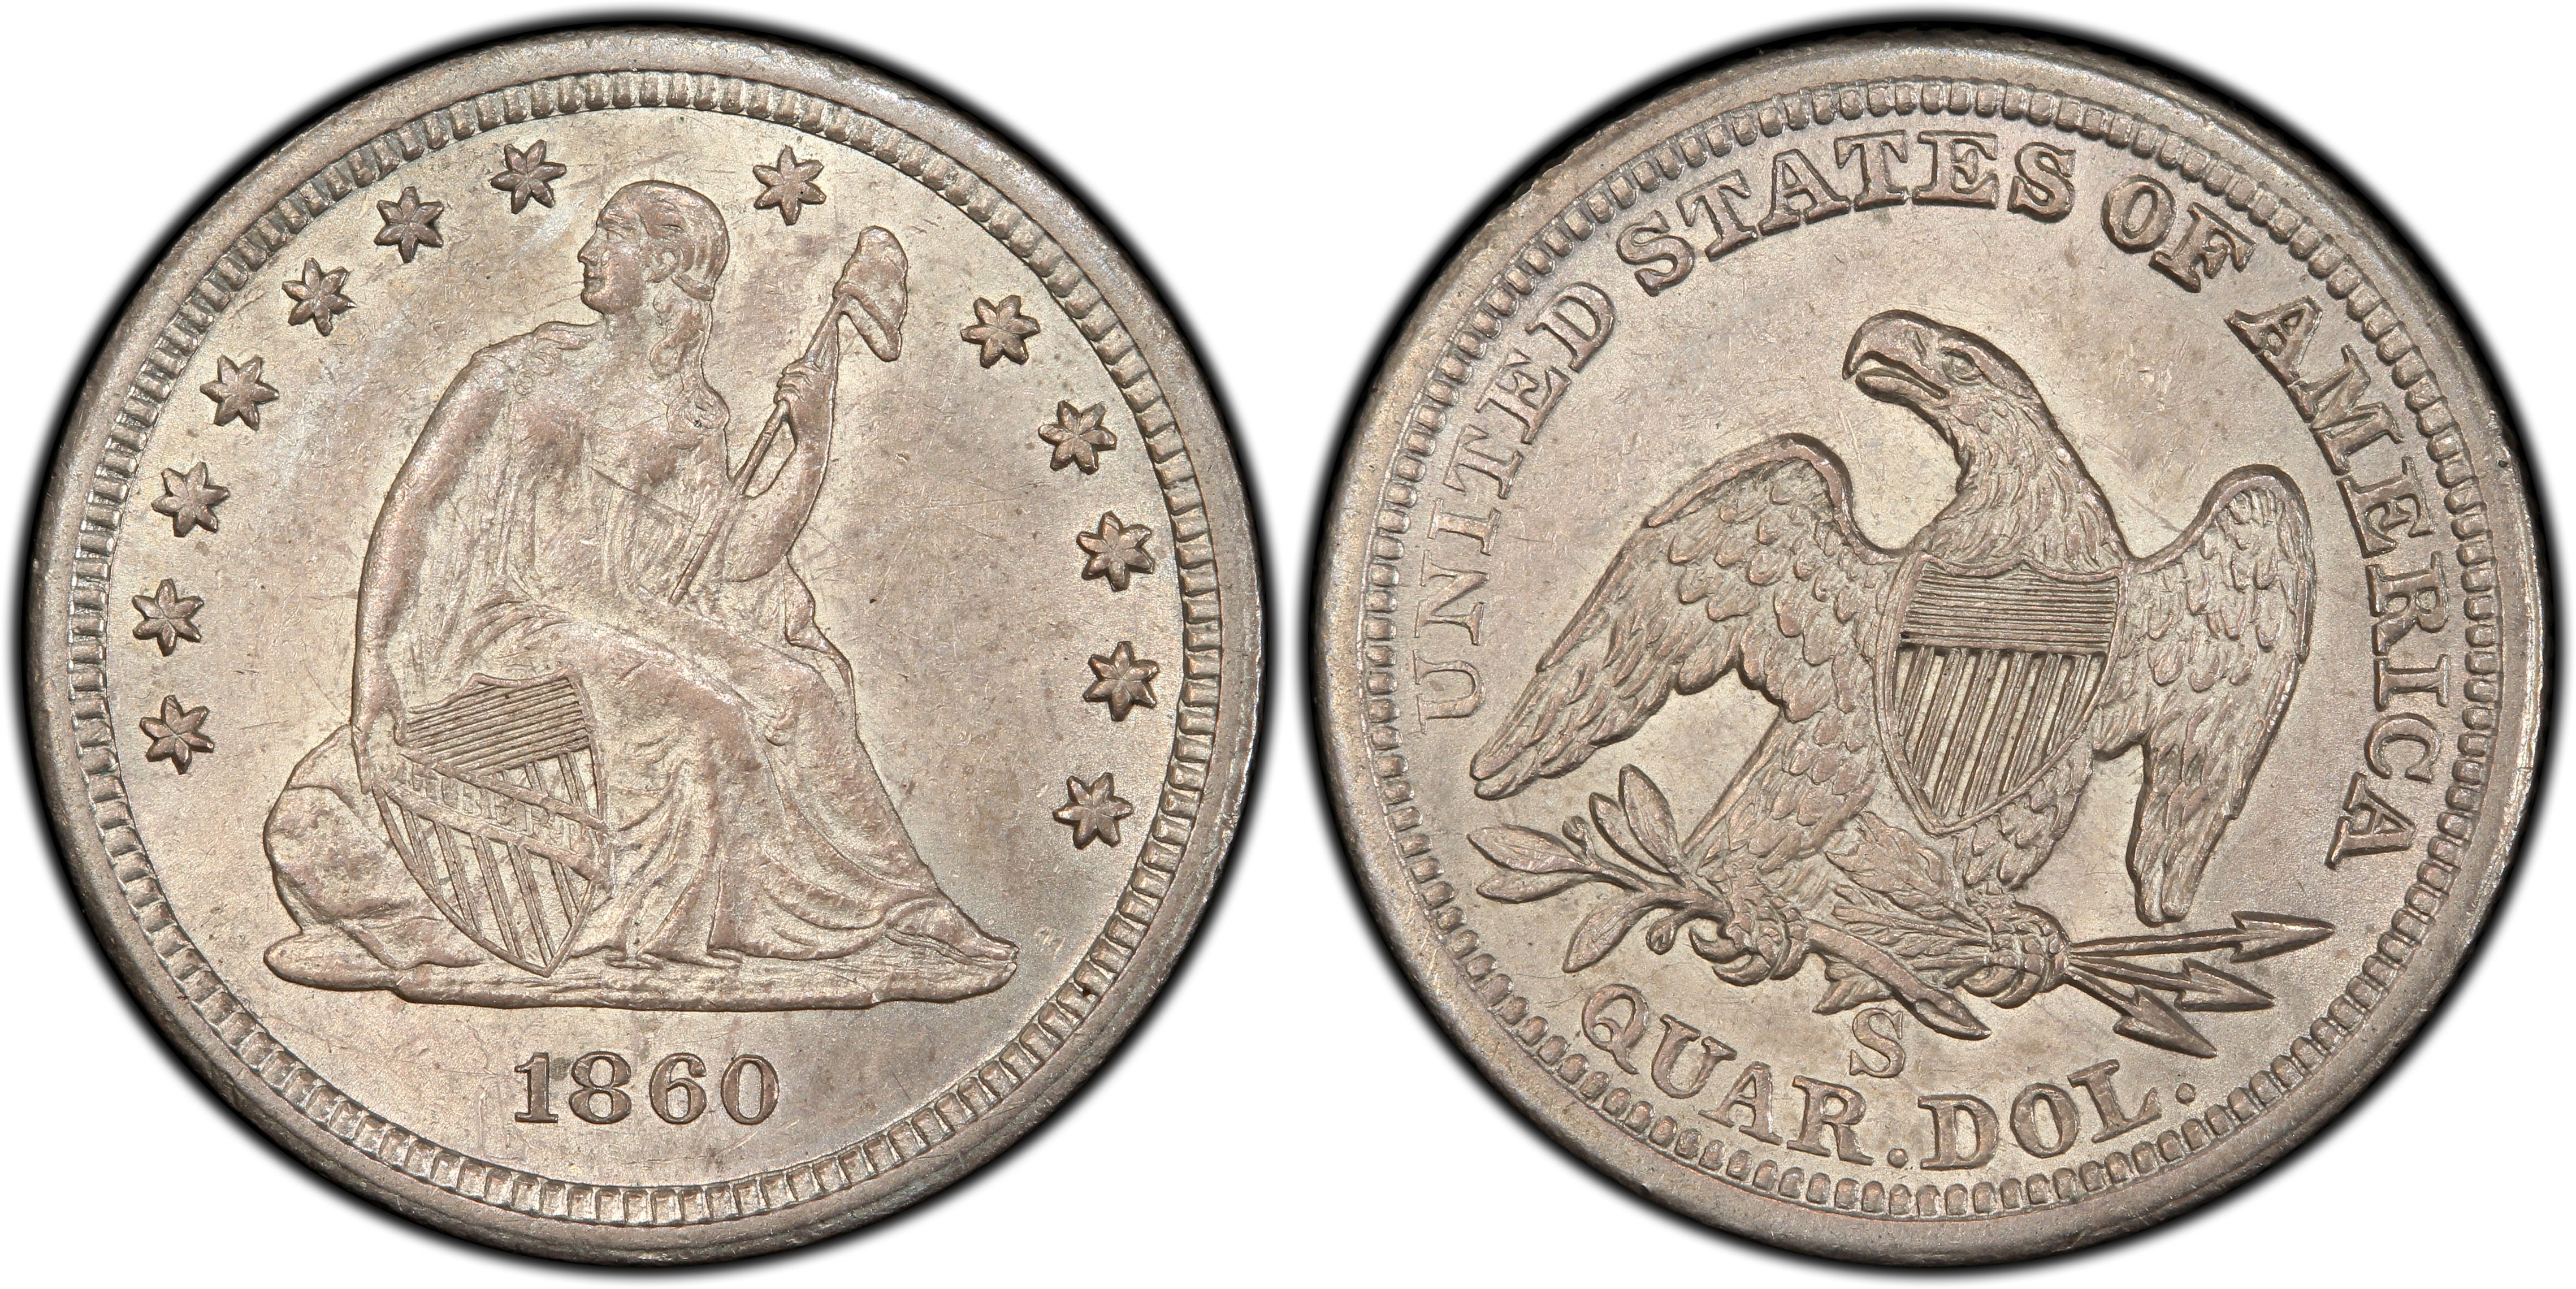 1860-S 25C (Regular Strike) Liberty Seated Quarter - PCGS CoinFacts